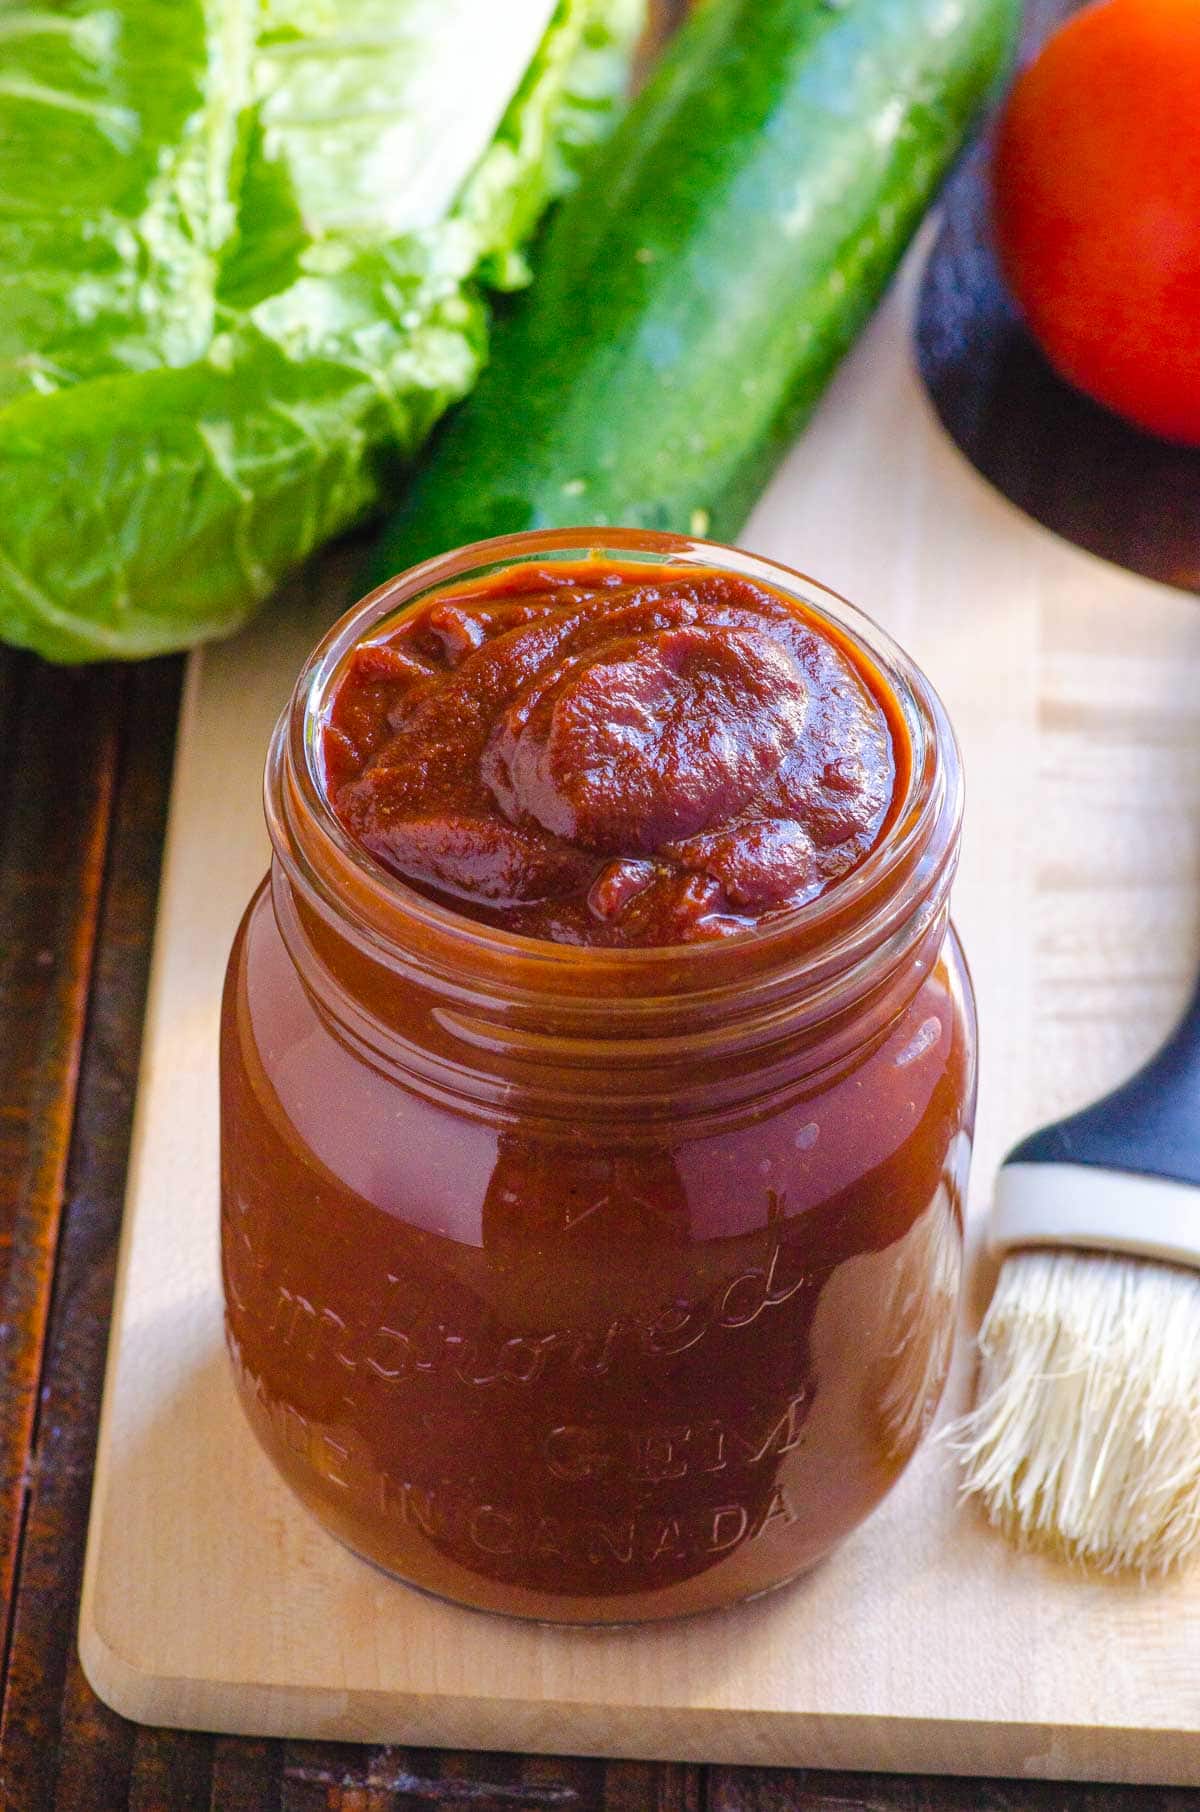 healthy bbq sauce recipe with basting brunch on cutting board